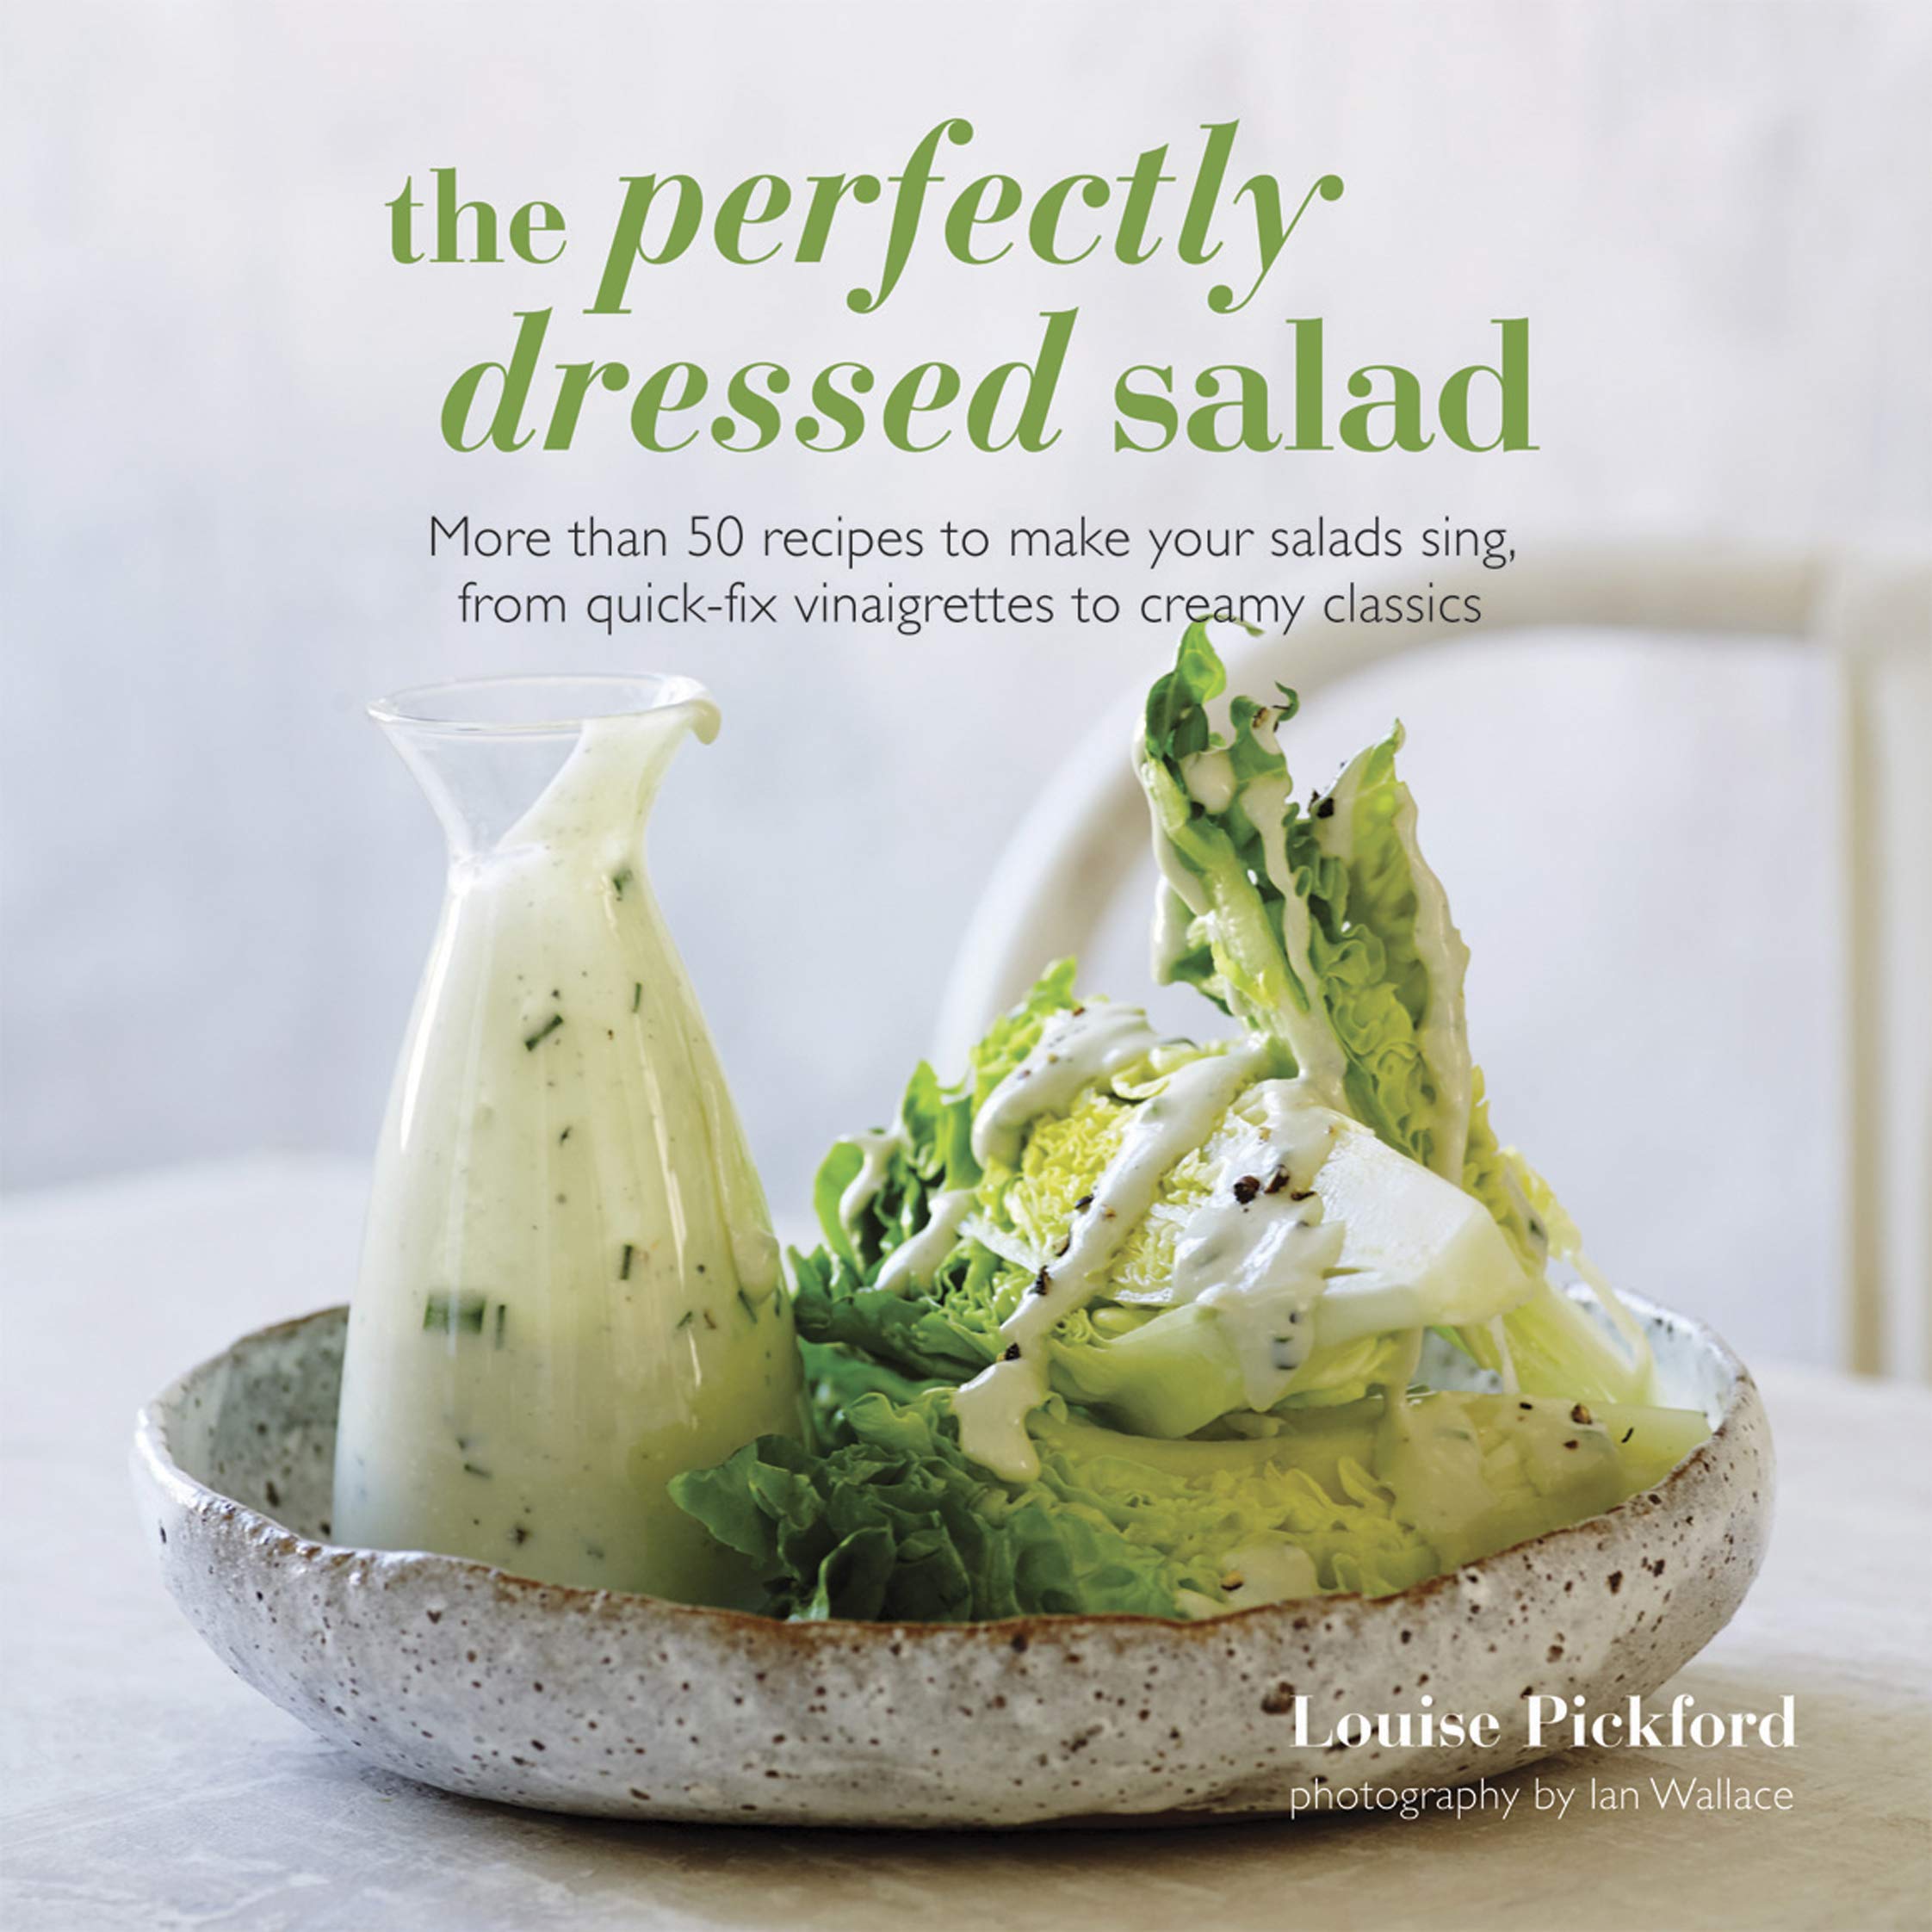 The Perfectly Dressed Salad: More than 50 Recipes to Make Your Salads Sing, From Quick-Fix Vinaigrettes to Creamy Classics (Louise Pickford)